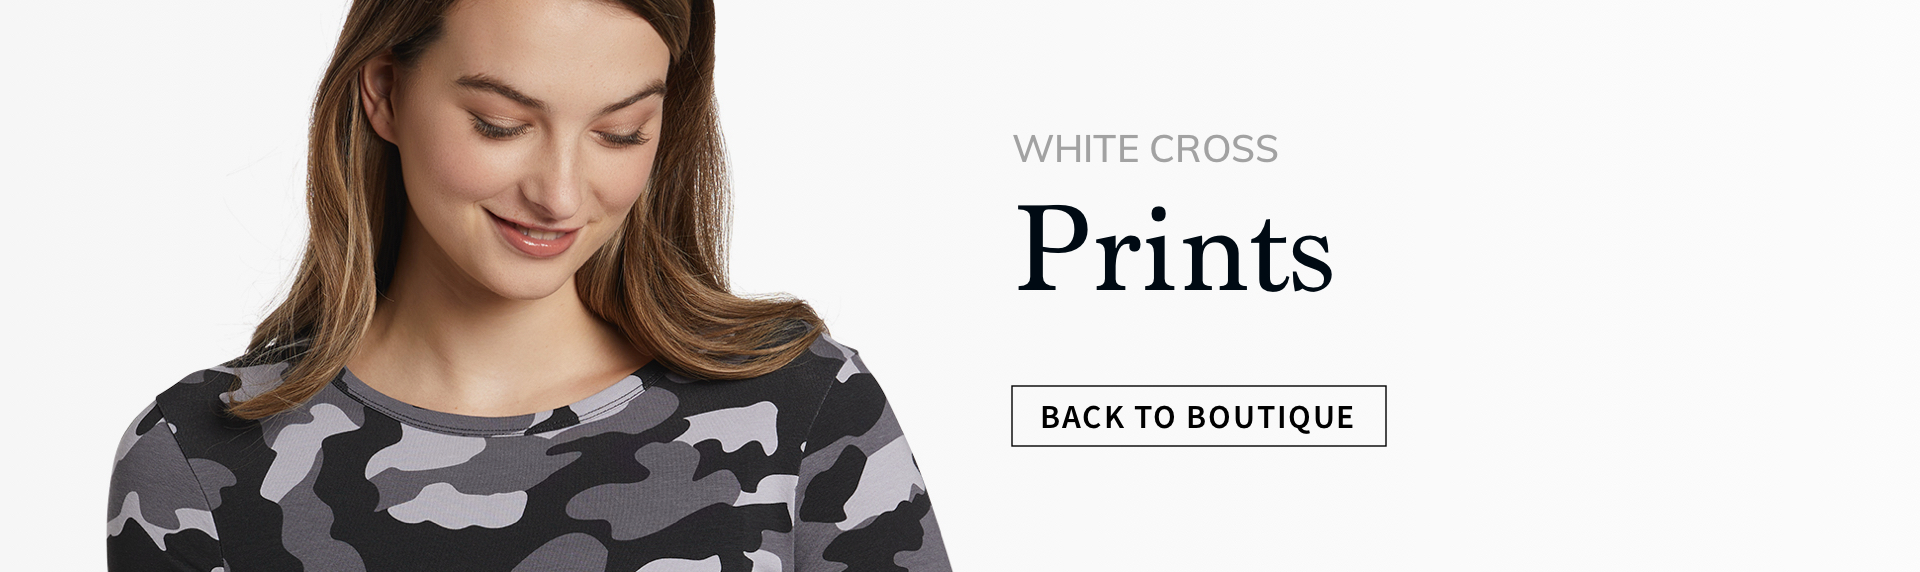 viewing white cross prints. click to go back to boutique.